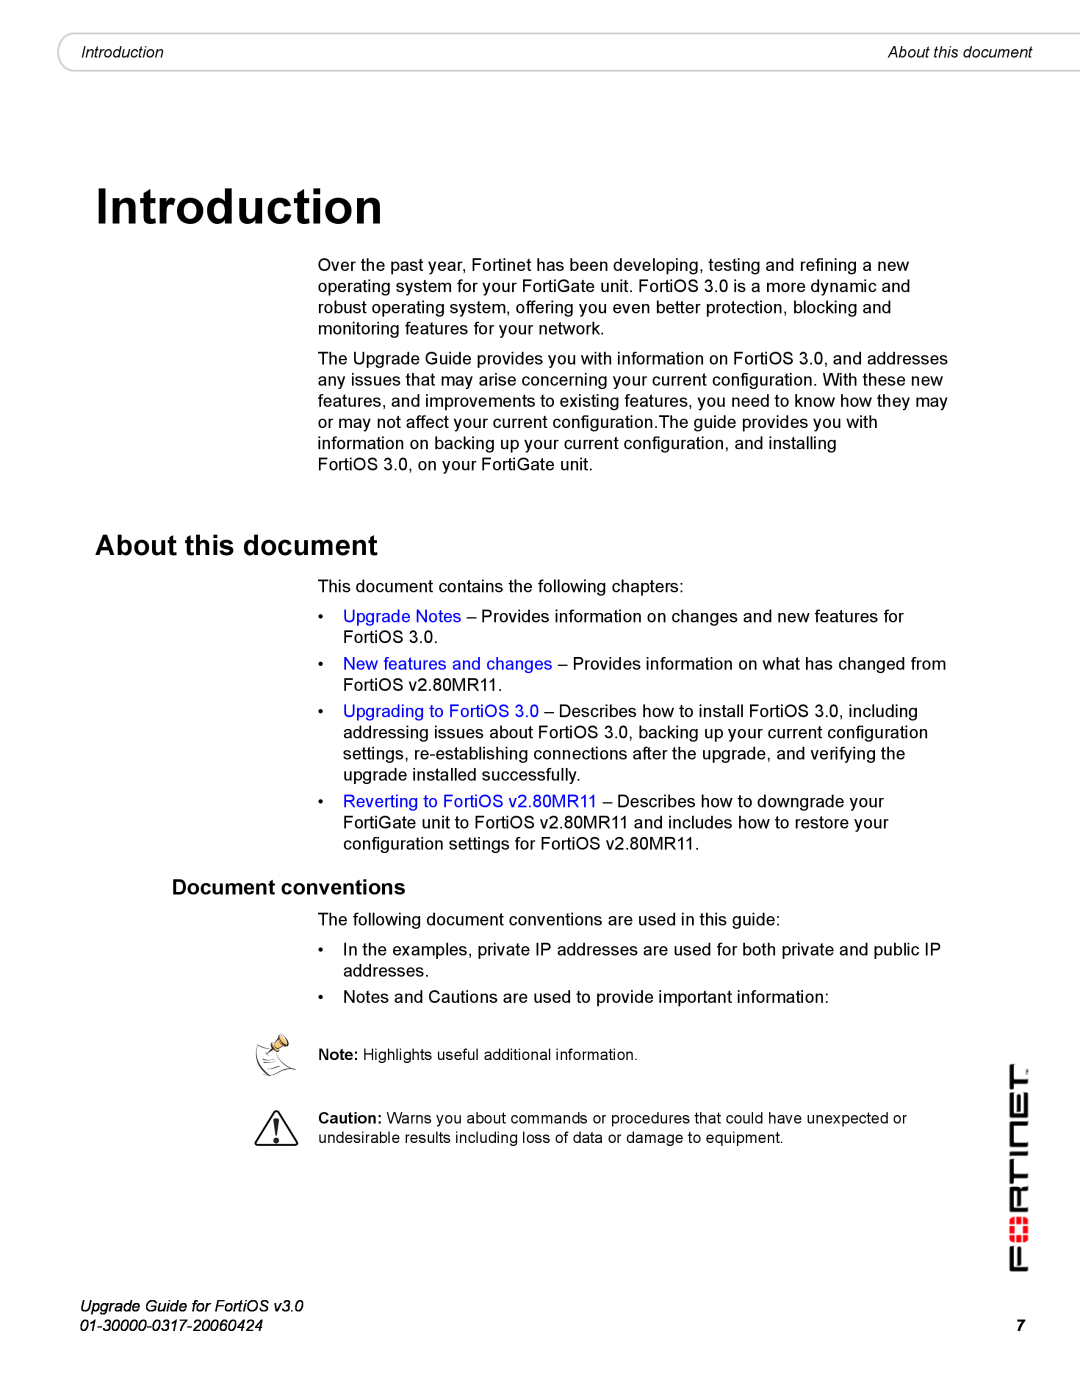 Fortinet FortiOS 3.0 manual Introduction, About this document, Document conventions 